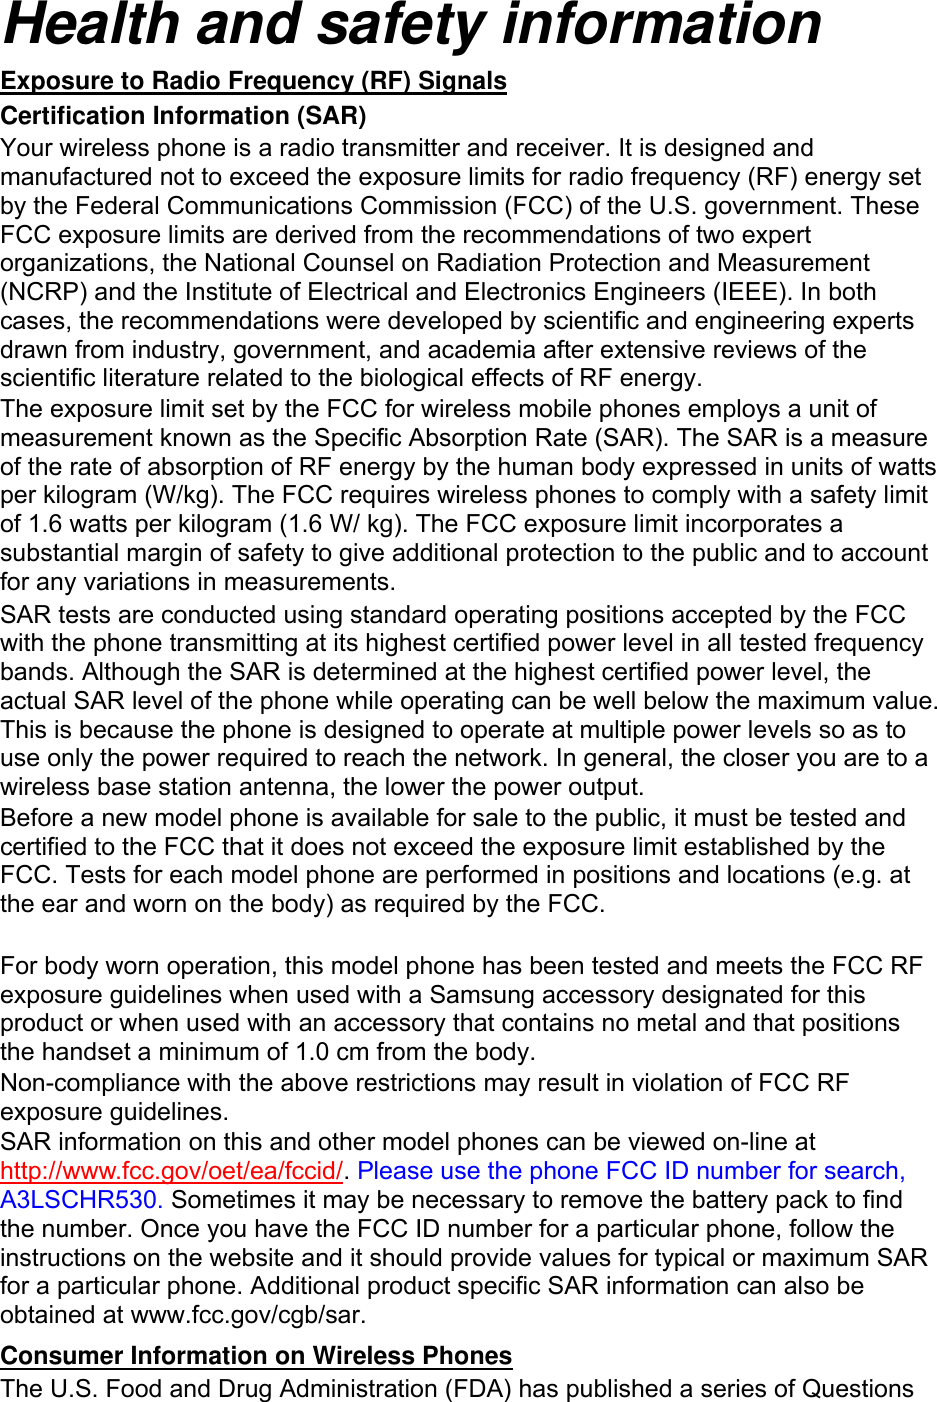 Health and safety information Exposure to Radio Frequency (RF) Signals Certification Information (SAR) Your wireless phone is a radio transmitter and receiver. It is designed and manufactured not to exceed the exposure limits for radio frequency (RF) energy set by the Federal Communications Commission (FCC) of the U.S. government. These FCC exposure limits are derived from the recommendations of two expert organizations, the National Counsel on Radiation Protection and Measurement (NCRP) and the Institute of Electrical and Electronics Engineers (IEEE). In both cases, the recommendations were developed by scientific and engineering experts drawn from industry, government, and academia after extensive reviews of the scientific literature related to the biological effects of RF energy. The exposure limit set by the FCC for wireless mobile phones employs a unit of measurement known as the Specific Absorption Rate (SAR). The SAR is a measure of the rate of absorption of RF energy by the human body expressed in units of watts per kilogram (W/kg). The FCC requires wireless phones to comply with a safety limit of 1.6 watts per kilogram (1.6 W/ kg). The FCC exposure limit incorporates a substantial margin of safety to give additional protection to the public and to account for any variations in measurements. SAR tests are conducted using standard operating positions accepted by the FCC with the phone transmitting at its highest certified power level in all tested frequency bands. Although the SAR is determined at the highest certified power level, the actual SAR level of the phone while operating can be well below the maximum value. This is because the phone is designed to operate at multiple power levels so as to use only the power required to reach the network. In general, the closer you are to a wireless base station antenna, the lower the power output. Before a new model phone is available for sale to the public, it must be tested and certified to the FCC that it does not exceed the exposure limit established by the FCC. Tests for each model phone are performed in positions and locations (e.g. at the ear and worn on the body) as required by the FCC.      For body worn operation, this model phone has been tested and meets the FCC RF exposure guidelines when used with a Samsung accessory designated for this product or when used with an accessory that contains no metal and that positions the handset a minimum of 1.0 cm from the body.   Non-compliance with the above restrictions may result in violation of FCC RF exposure guidelines. SAR information on this and other model phones can be viewed on-line at http://www.fcc.gov/oet/ea/fccid/. Please use the phone FCC ID number for search, A3LSCHR530. Sometimes it may be necessary to remove the battery pack to find the number. Once you have the FCC ID number for a particular phone, follow the instructions on the website and it should provide values for typical or maximum SAR for a particular phone. Additional product specific SAR information can also be obtained at www.fcc.gov/cgb/sar. Consumer Information on Wireless Phones The U.S. Food and Drug Administration (FDA) has published a series of Questions 